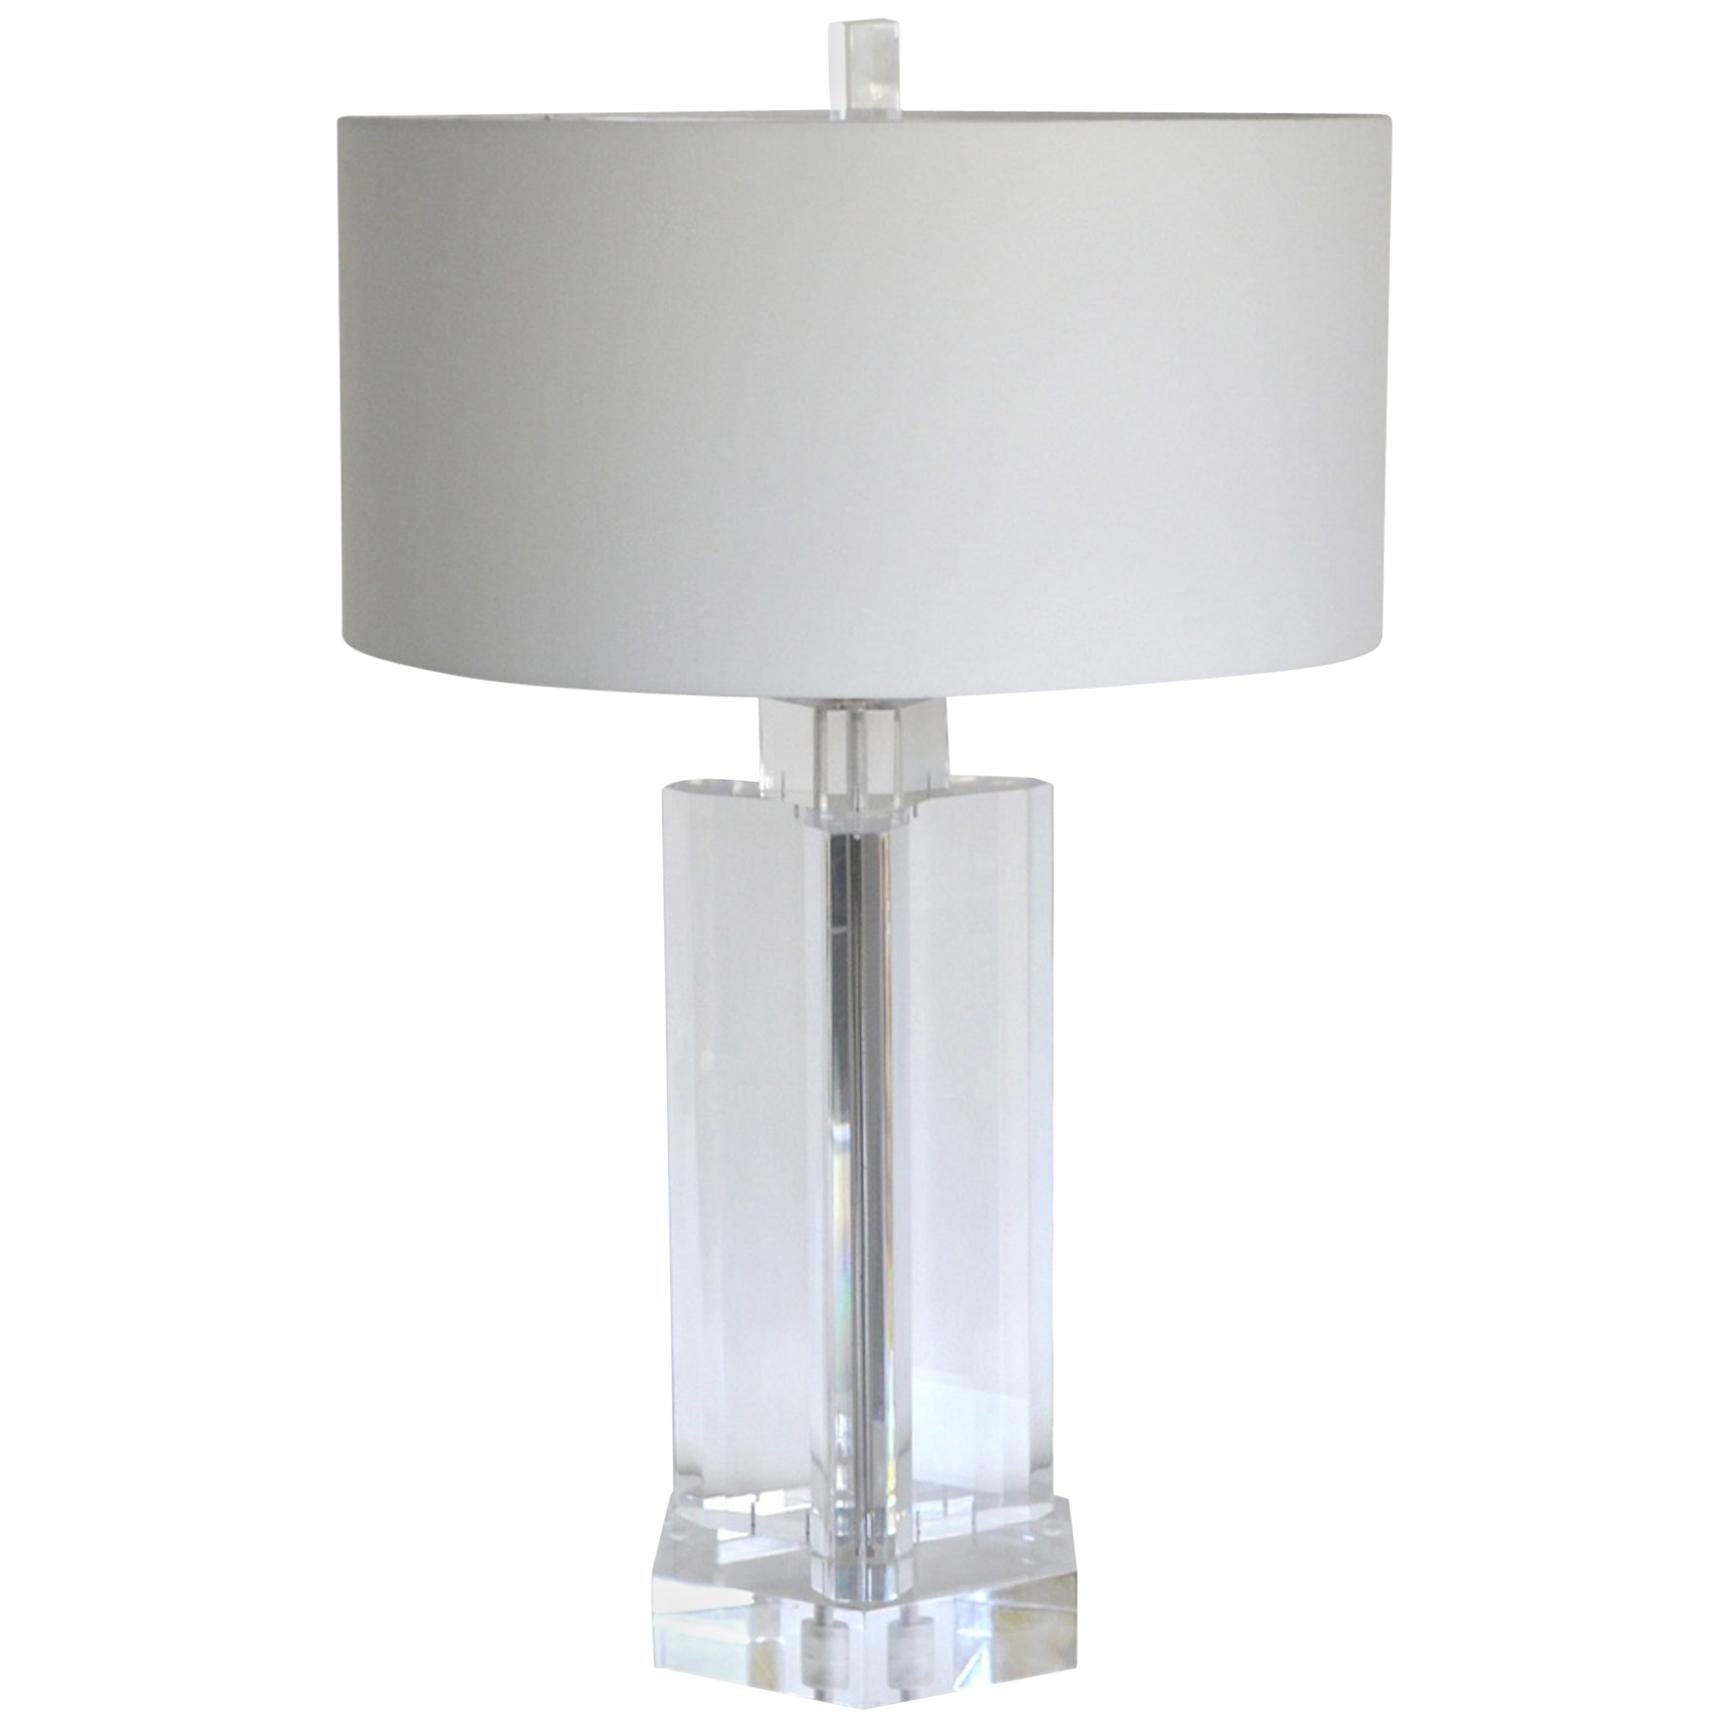 Midcentury Stunning Geometric Form Lucite Table Lamp For Sale